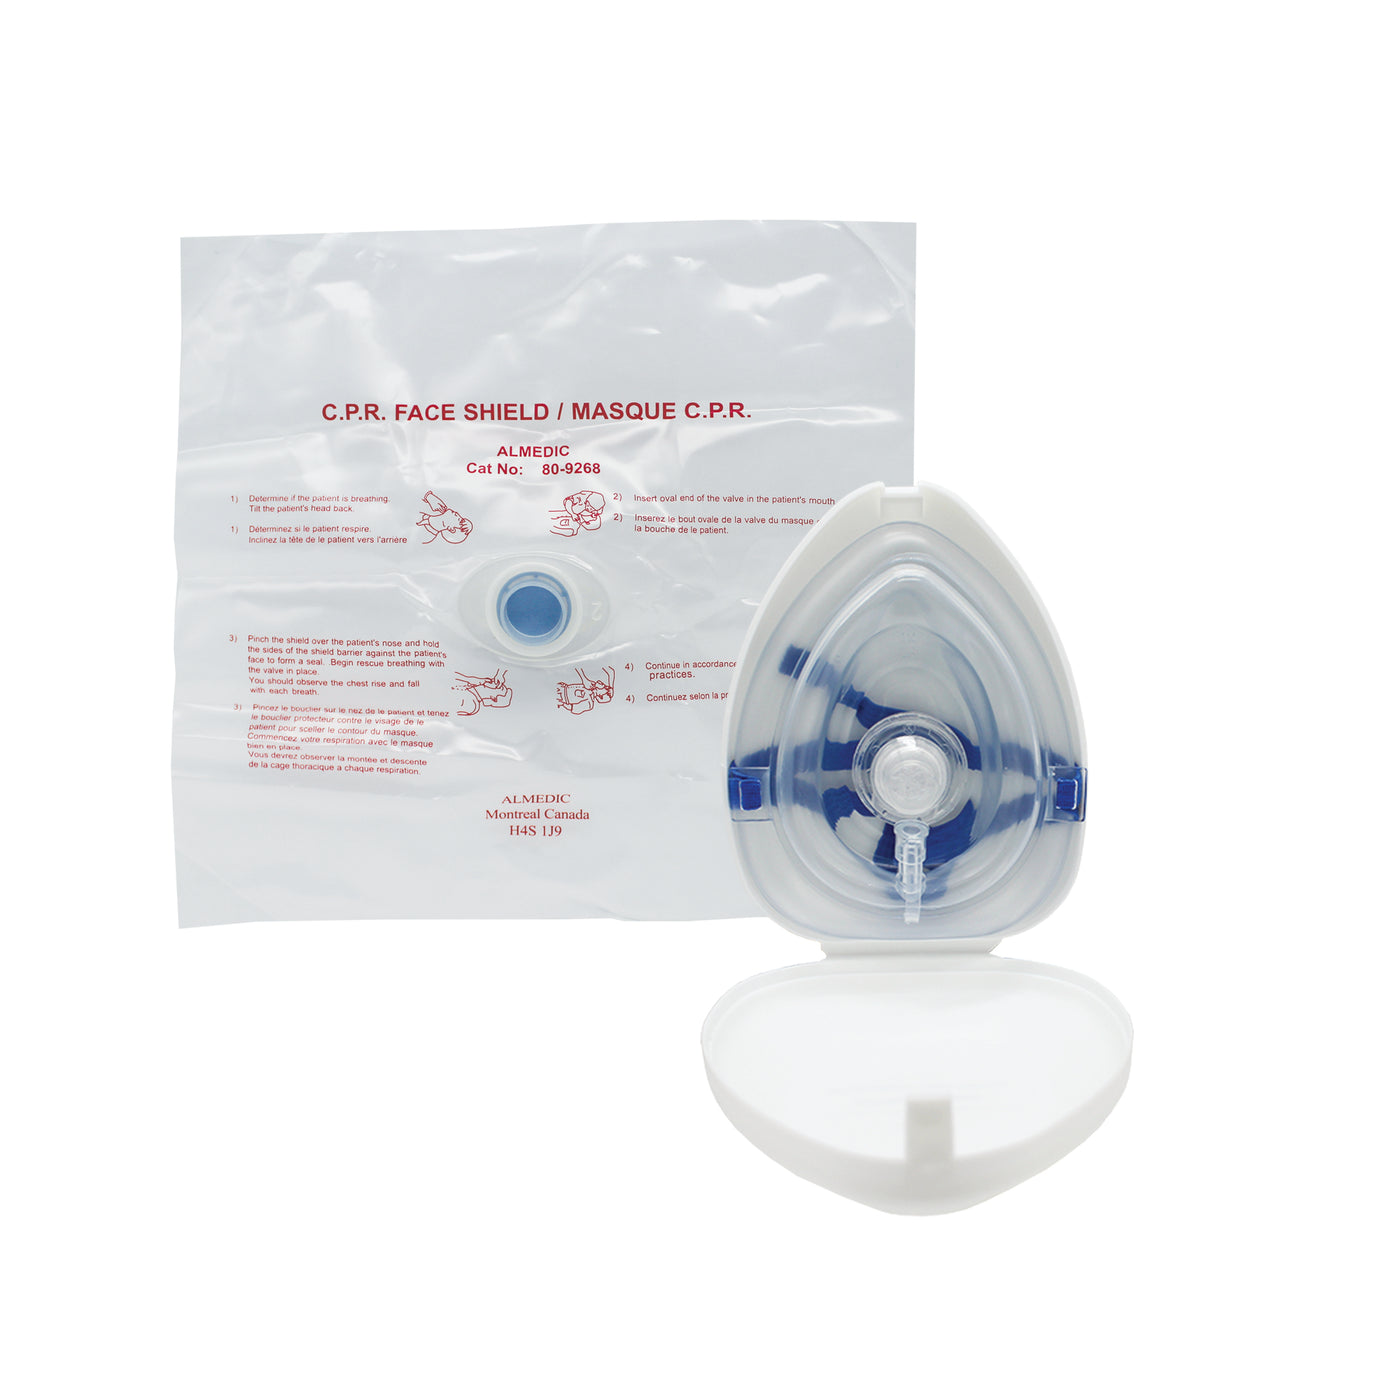 CPR Masks and CPR Barrier Devices